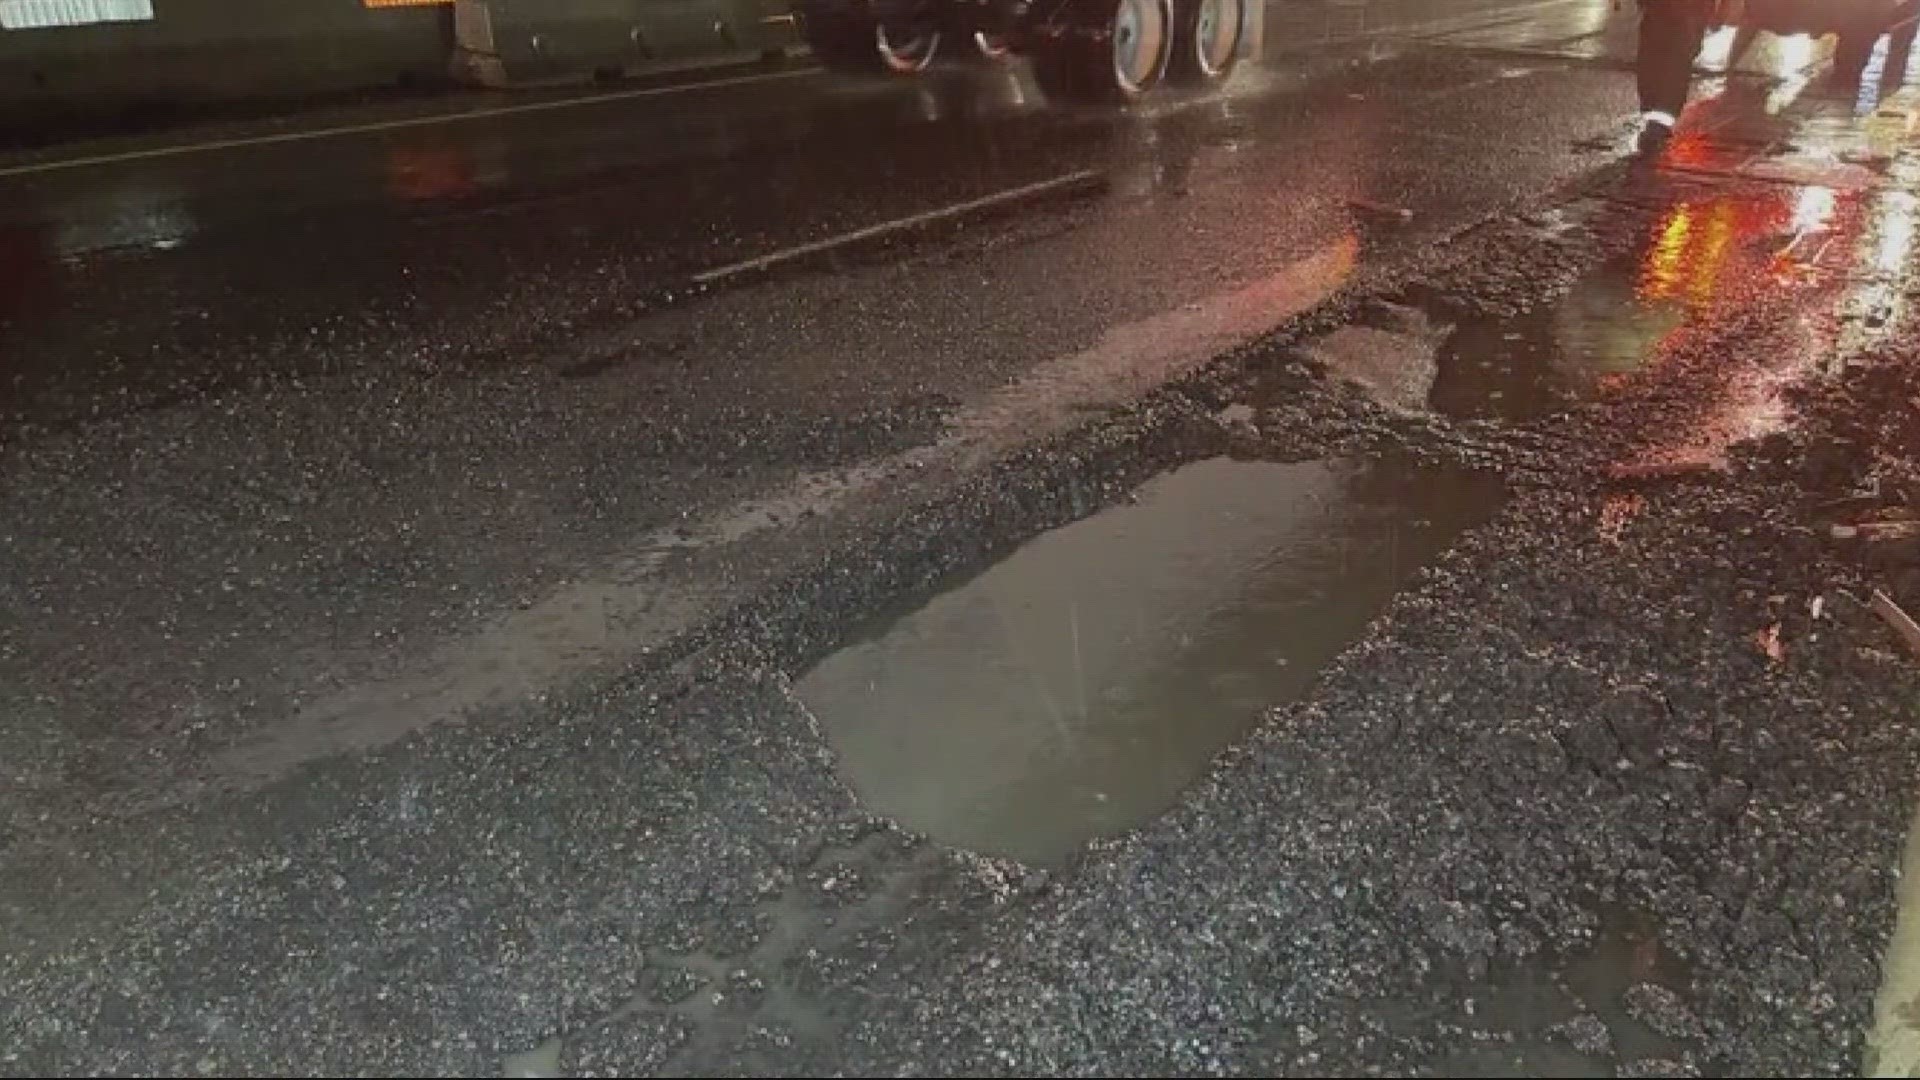 The Oregon Department of Transportation has blocked a southbound lane of I-205 for an emergency pothole repair near West Linn around 99E and the Abernethy Bridge.